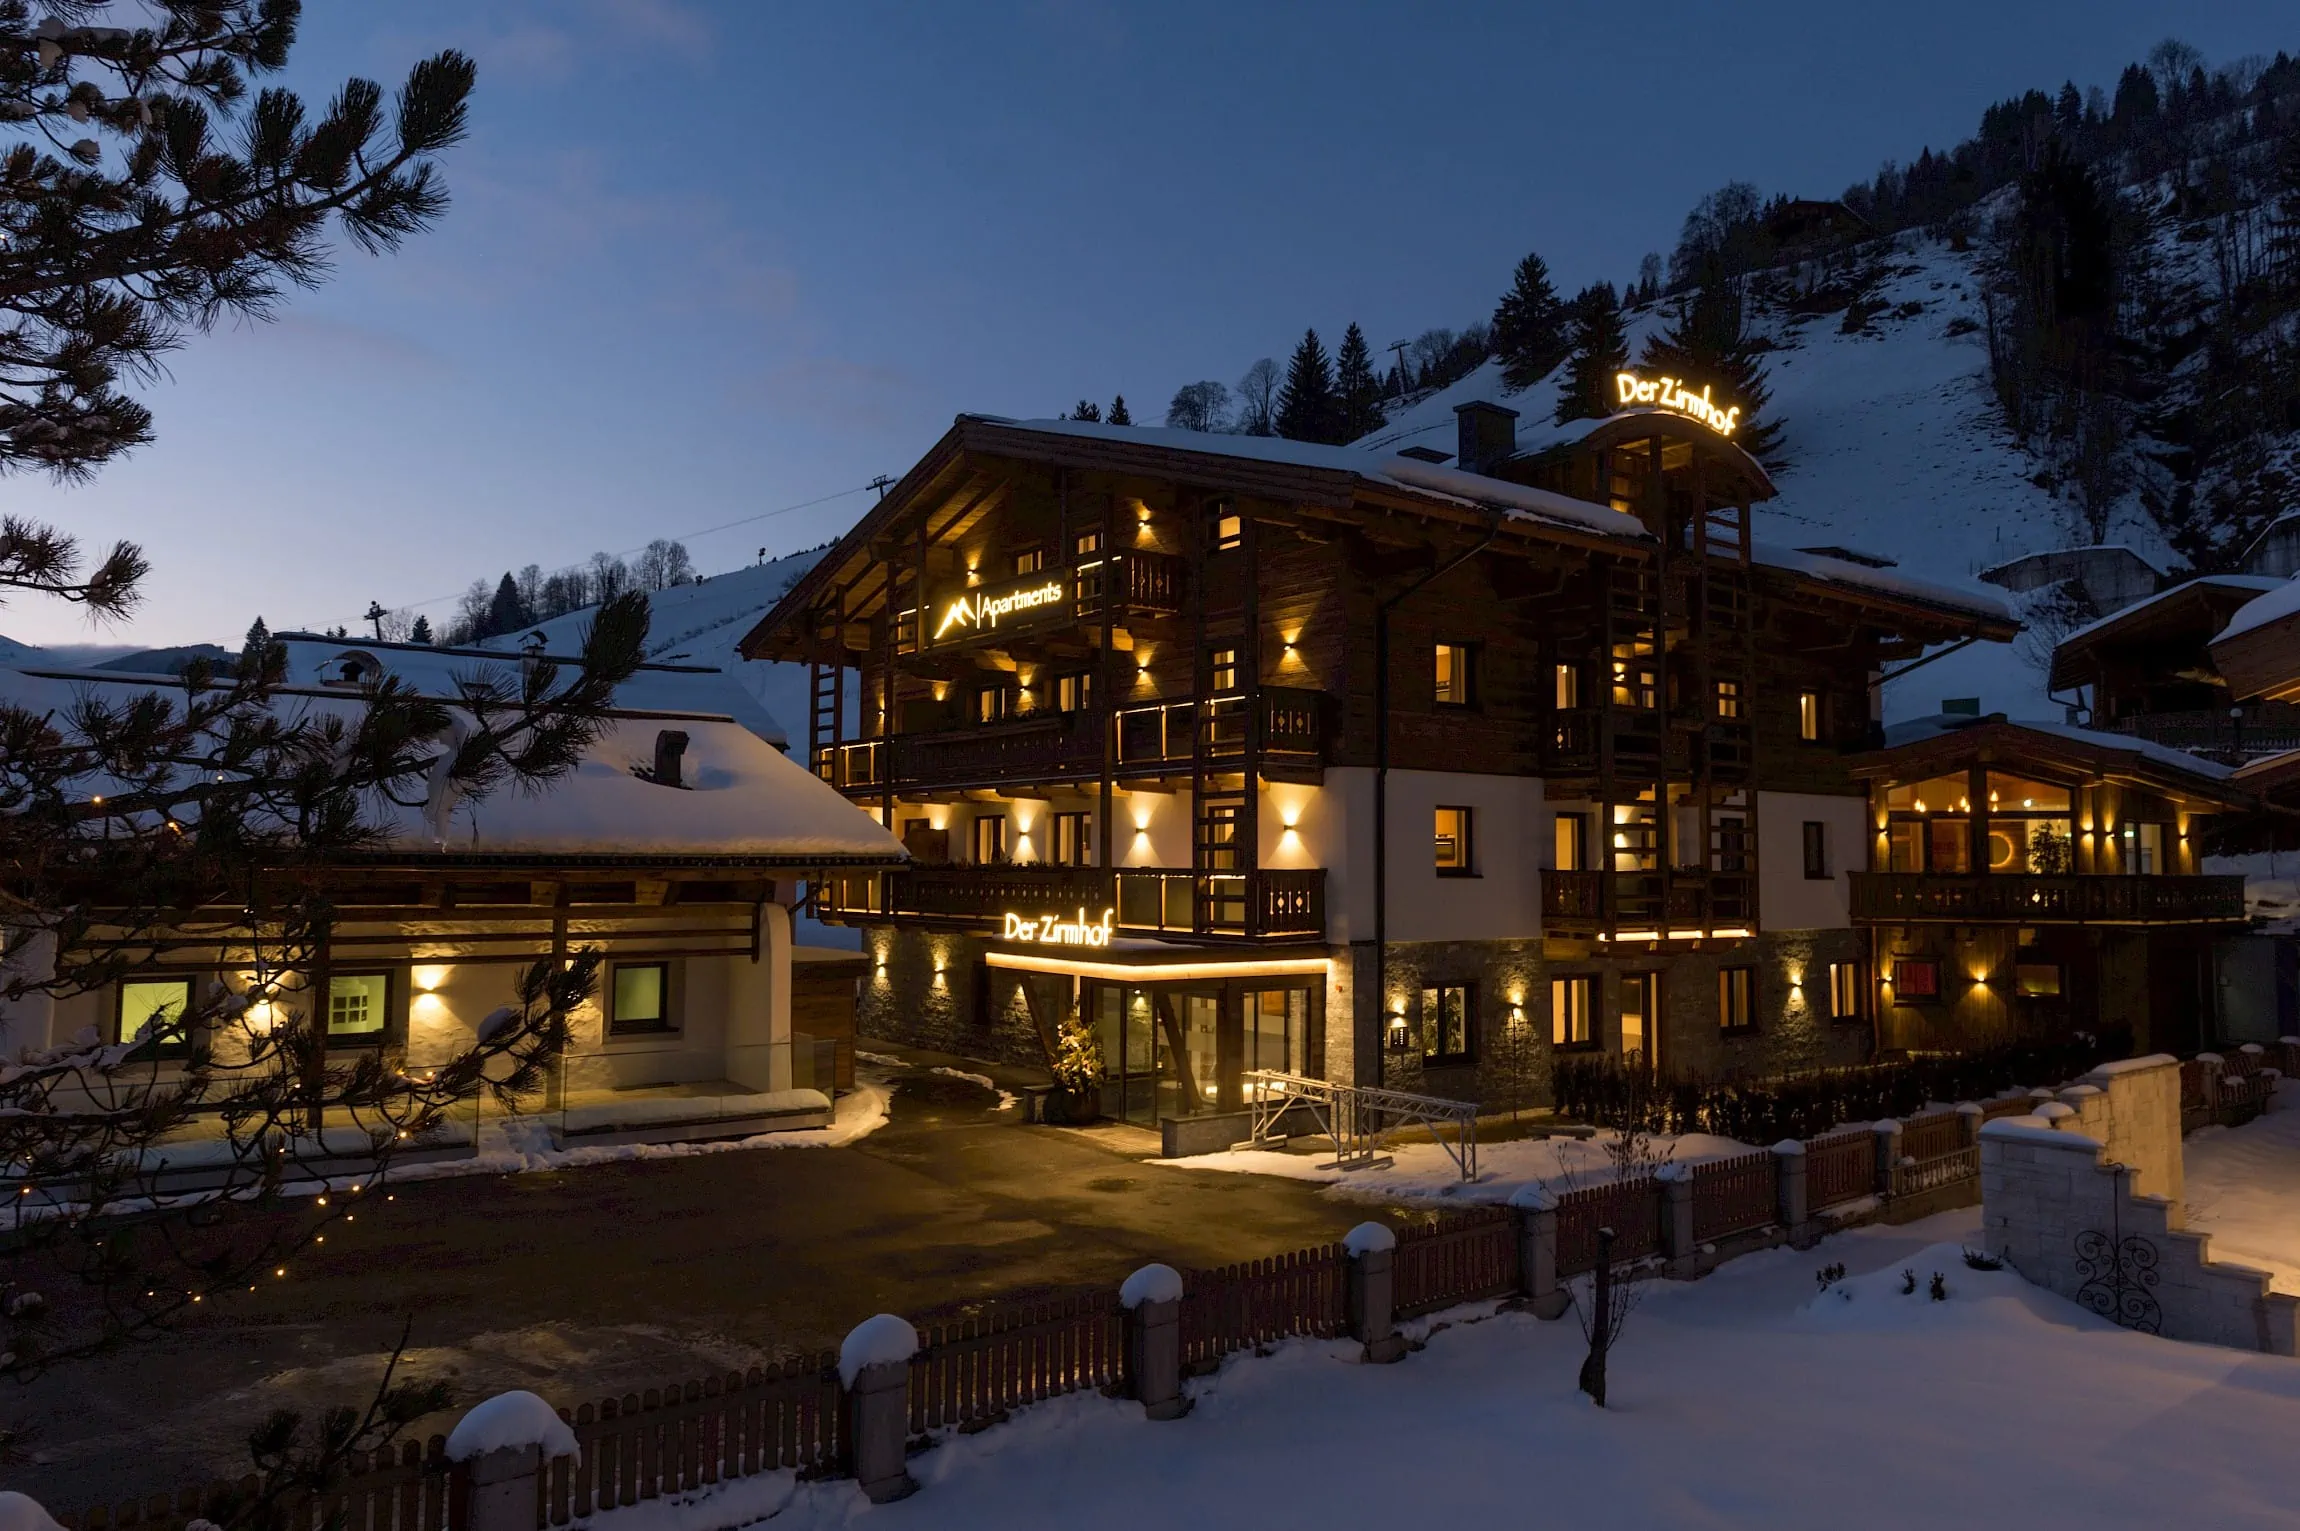 Zirmhof Apartments in Saalbach at night in winter